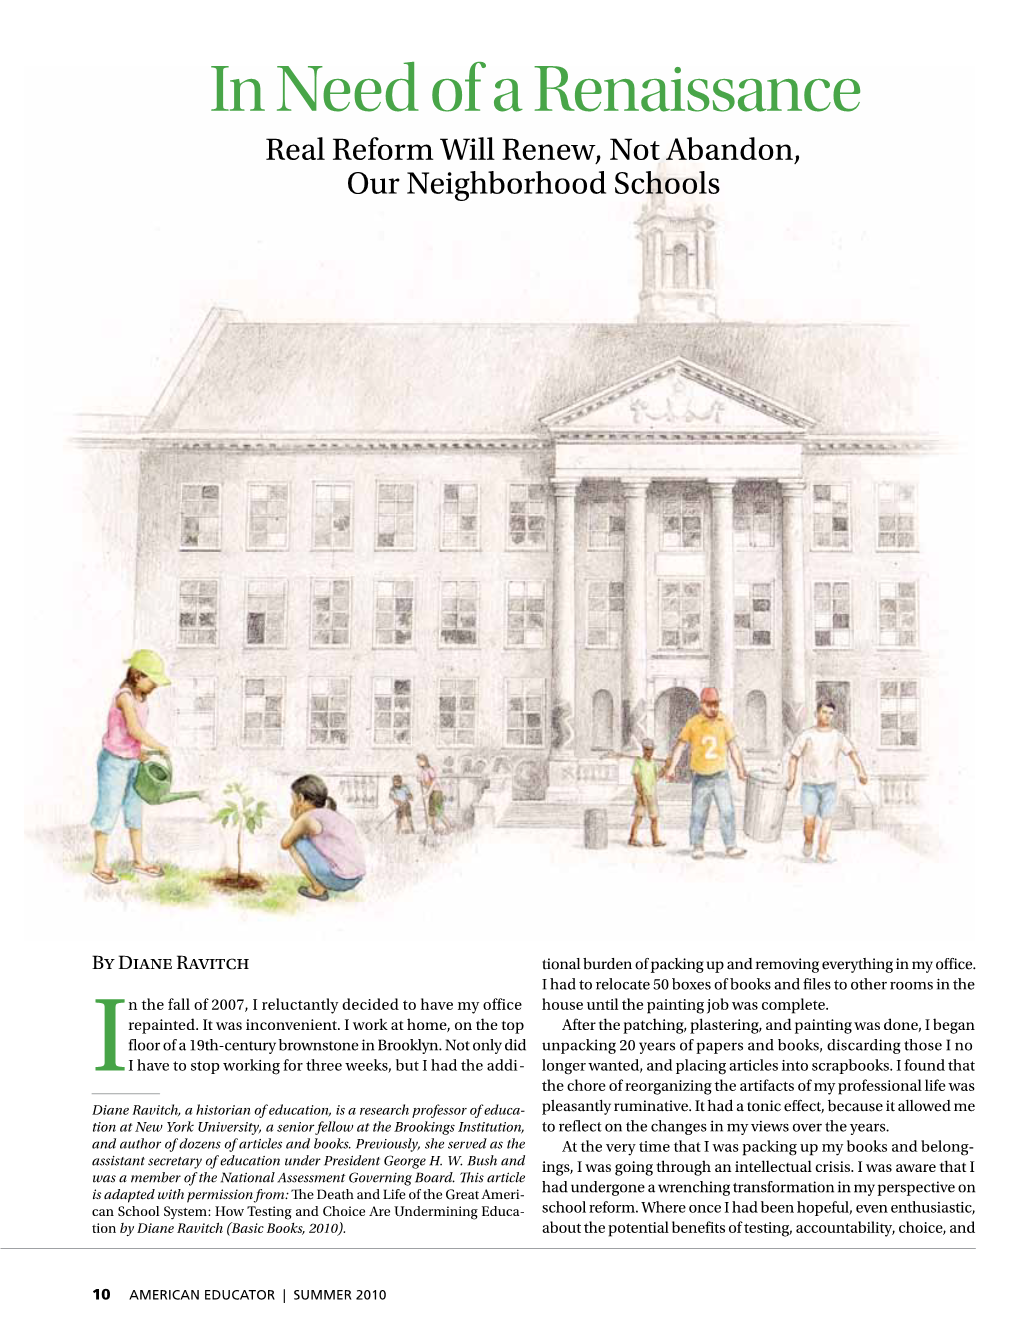 In Need of a Renaissance Real Reform Will Renew, Not Abandon, Our Neighborhood Schools